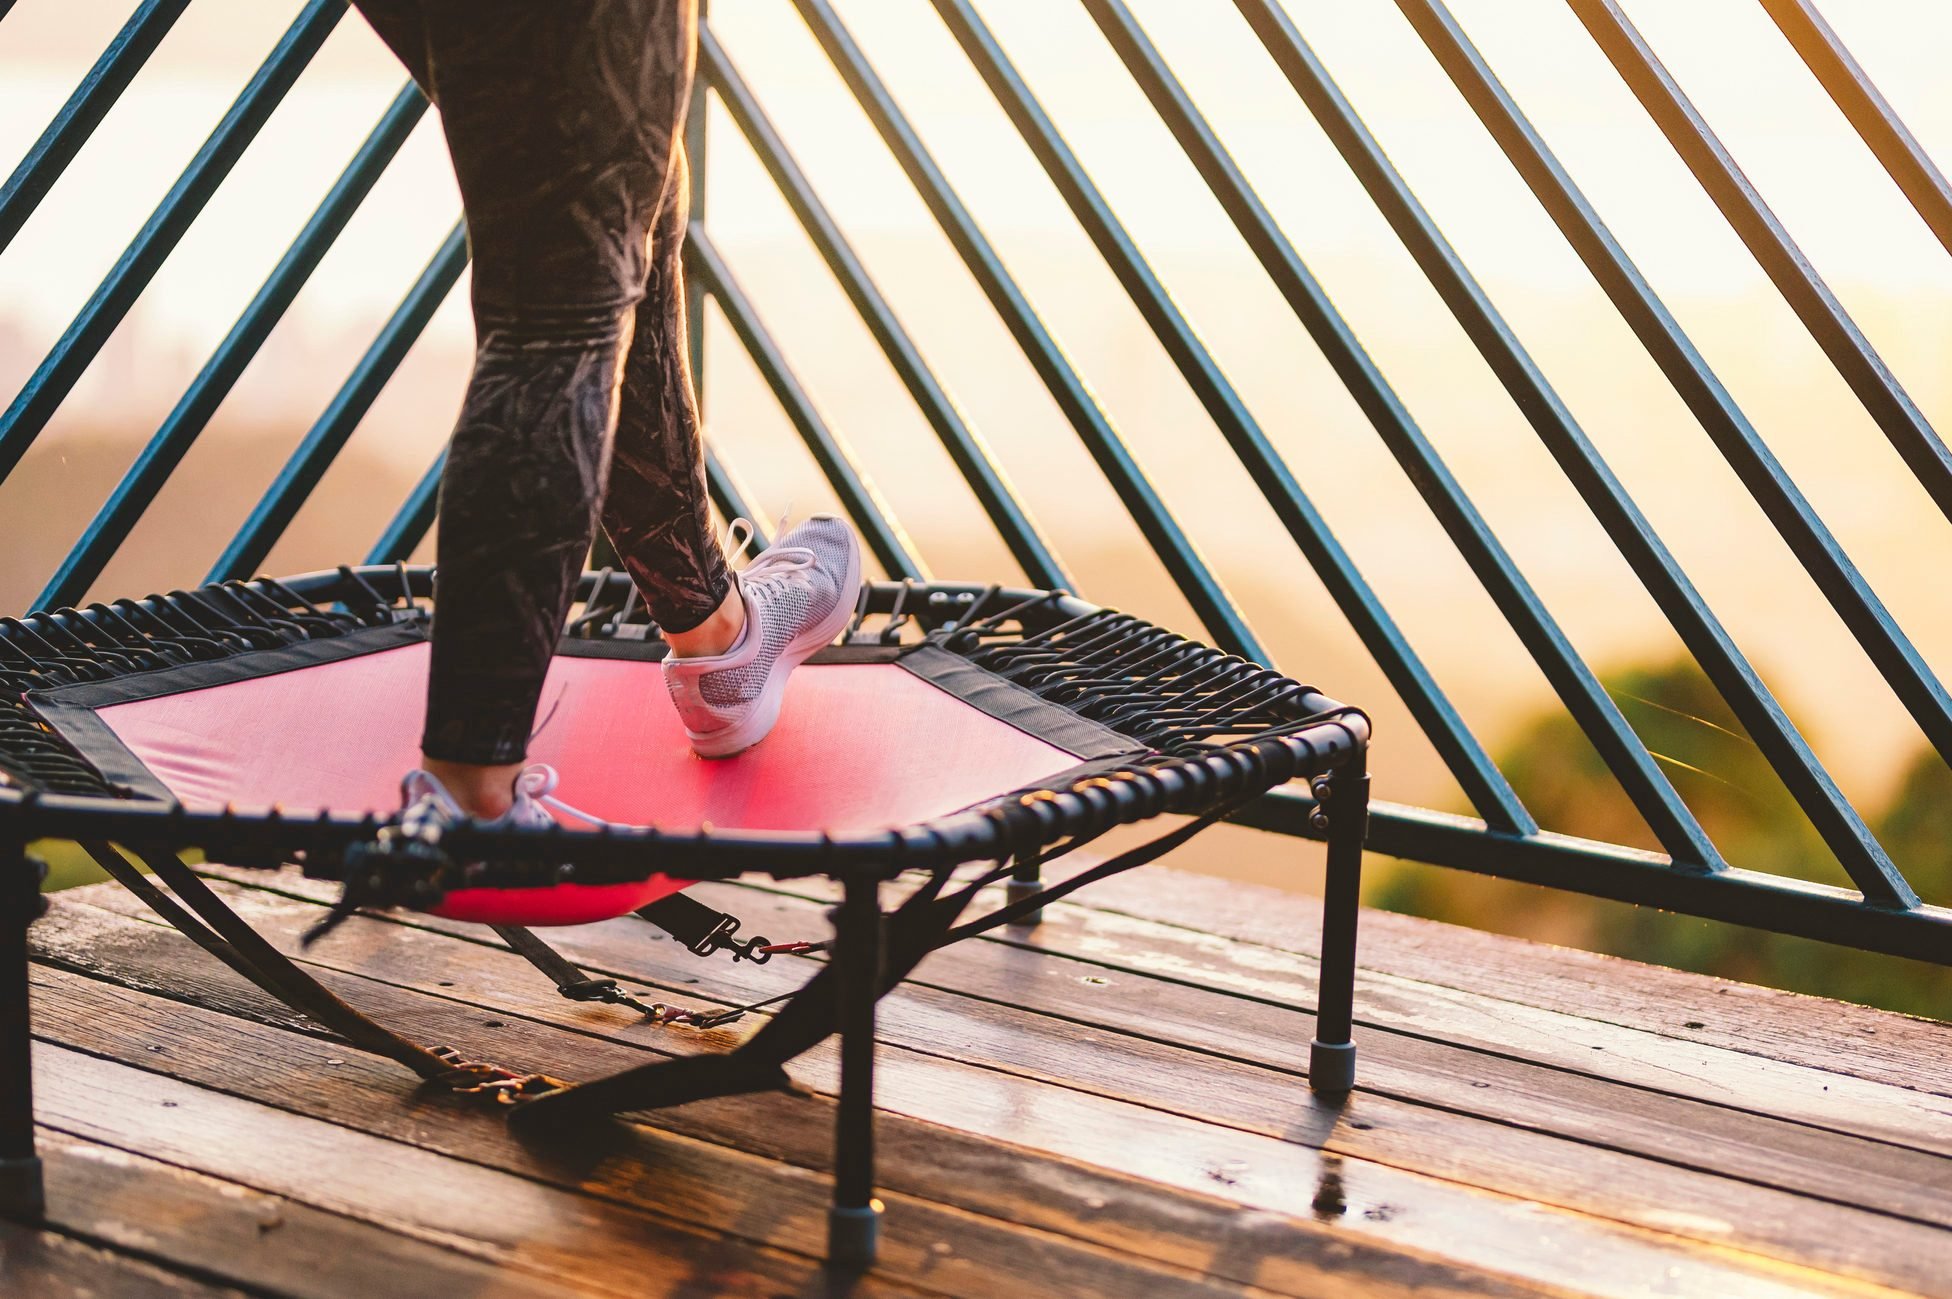 I Tried a Rebounder Trampoline for At-Home Workouts and Here's What It's Like